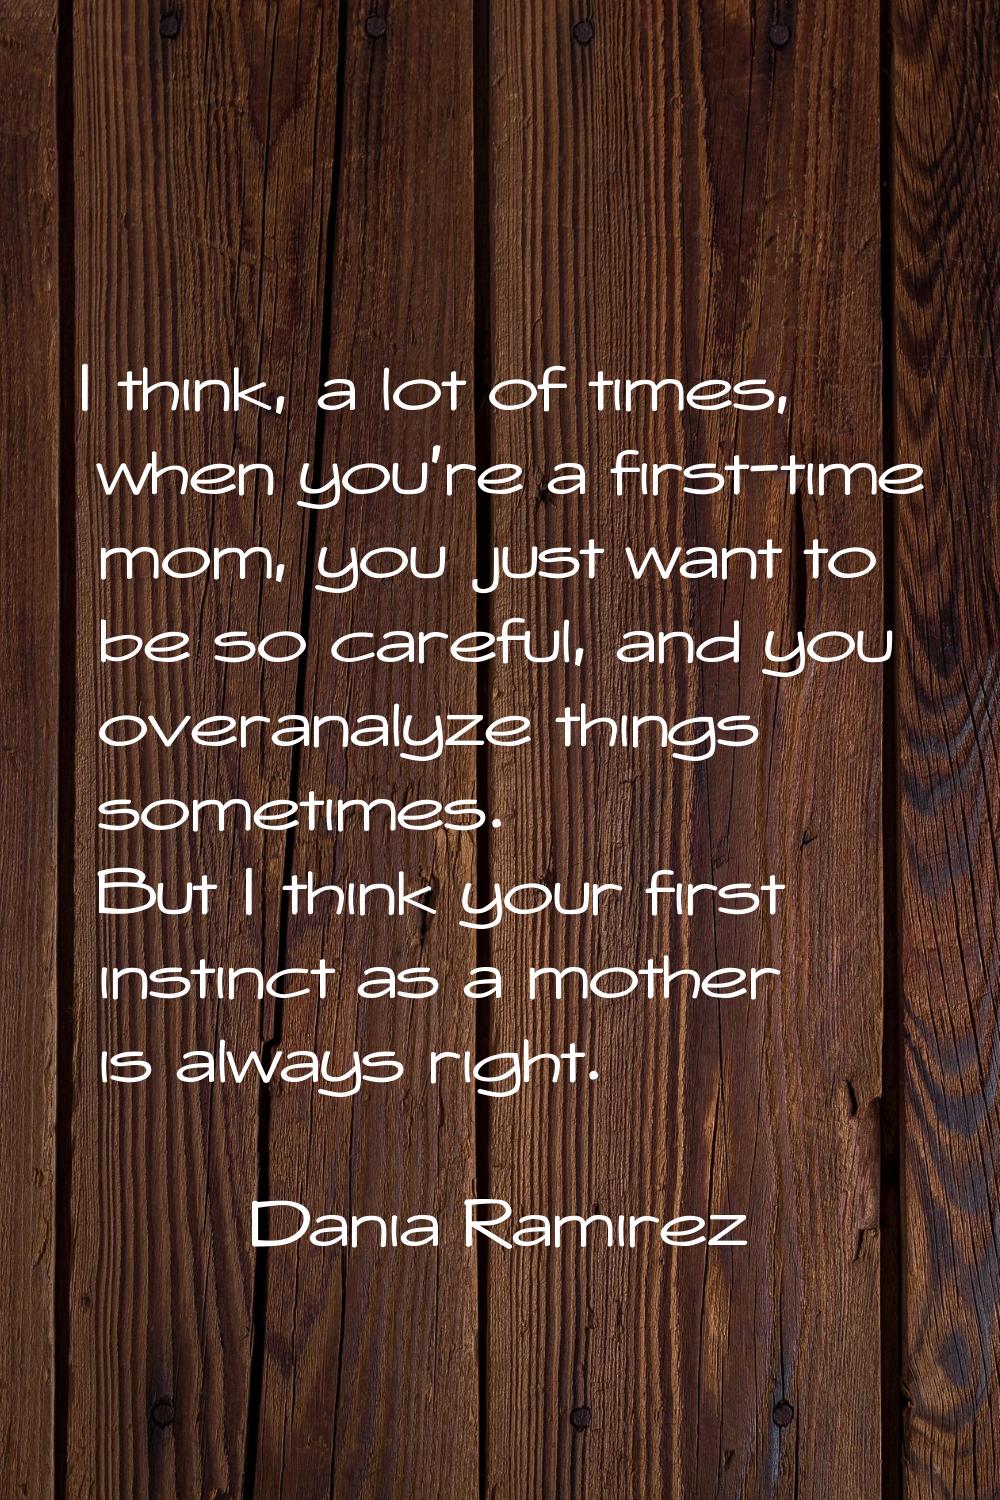 I think, a lot of times, when you're a first-time mom, you just want to be so careful, and you over